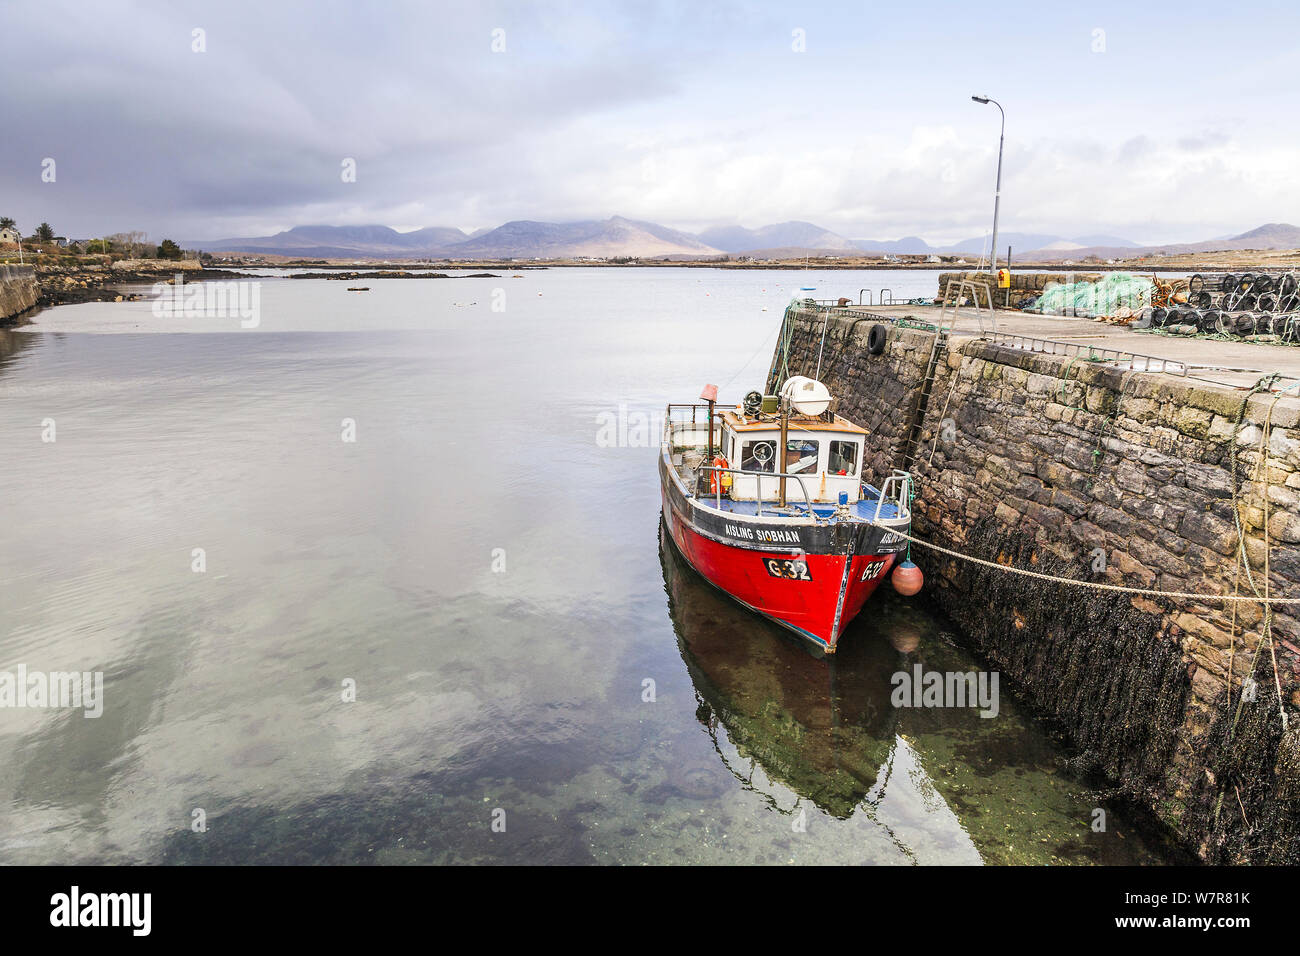 View over Roundstone Harbour, with fishing boat moored to the quay, Connemara, Republic of Ireland, March 2013. Stock Photo